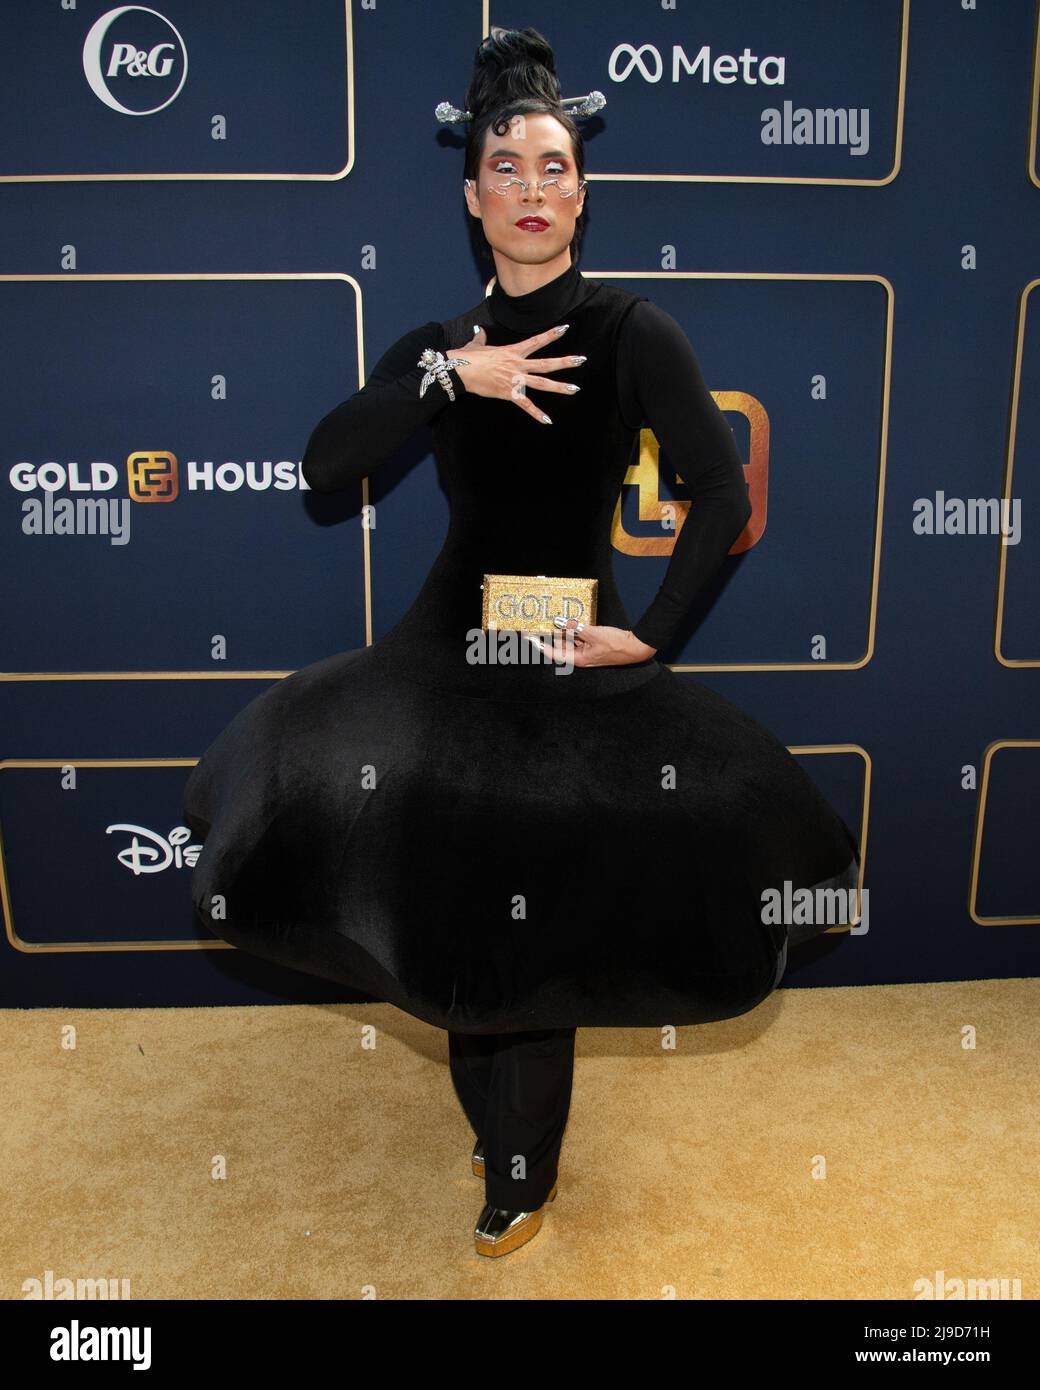 Los Angeles, California, USA. 21st May, 2022. Eugene Lee Yang. Gold House's Inaugural Gold Gala: A New Gold Age. Credit: Billy Bennight/AdMedia/Newscom/Alamy Live News Stock Photo